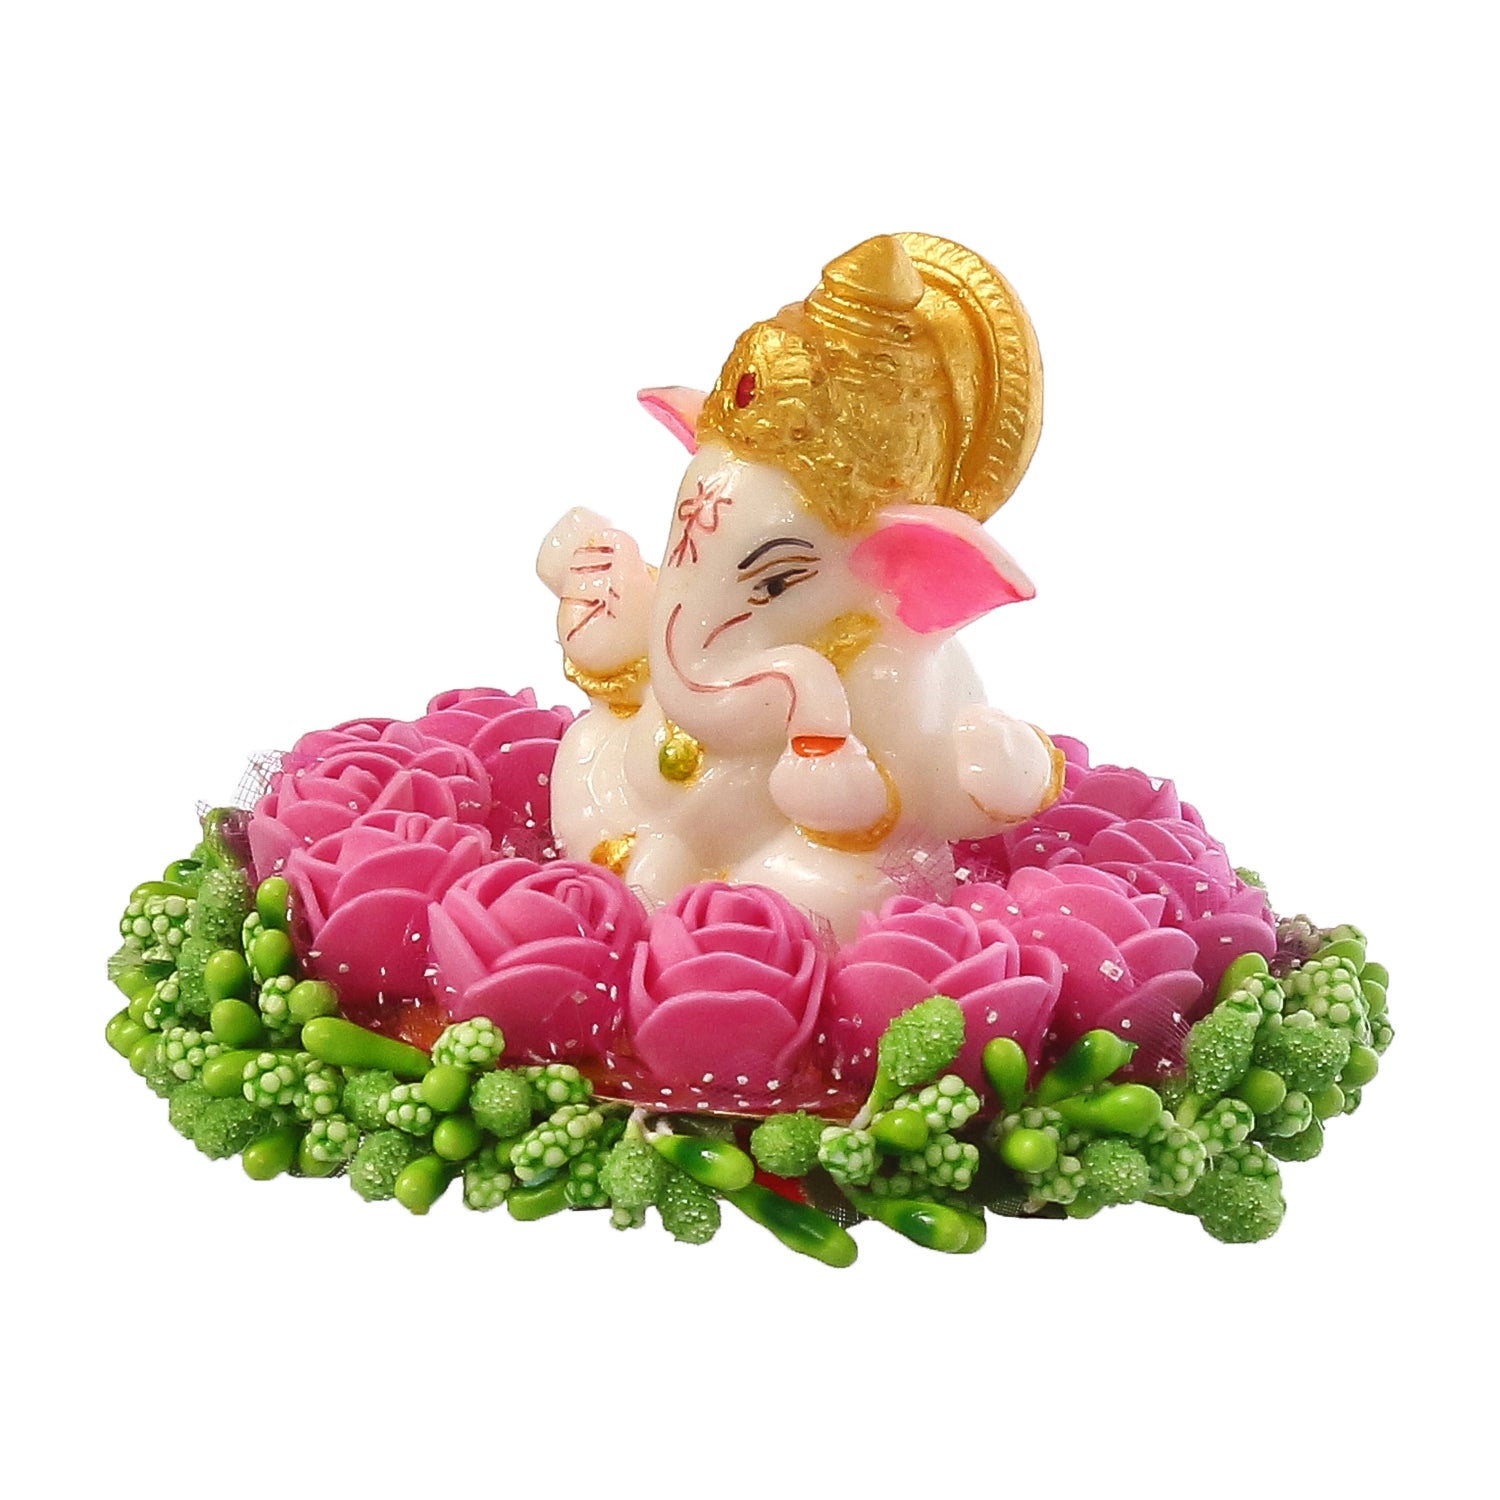 Lord Ganesha Idol On Decorative Handcrafted Pink Flowers Plate 5